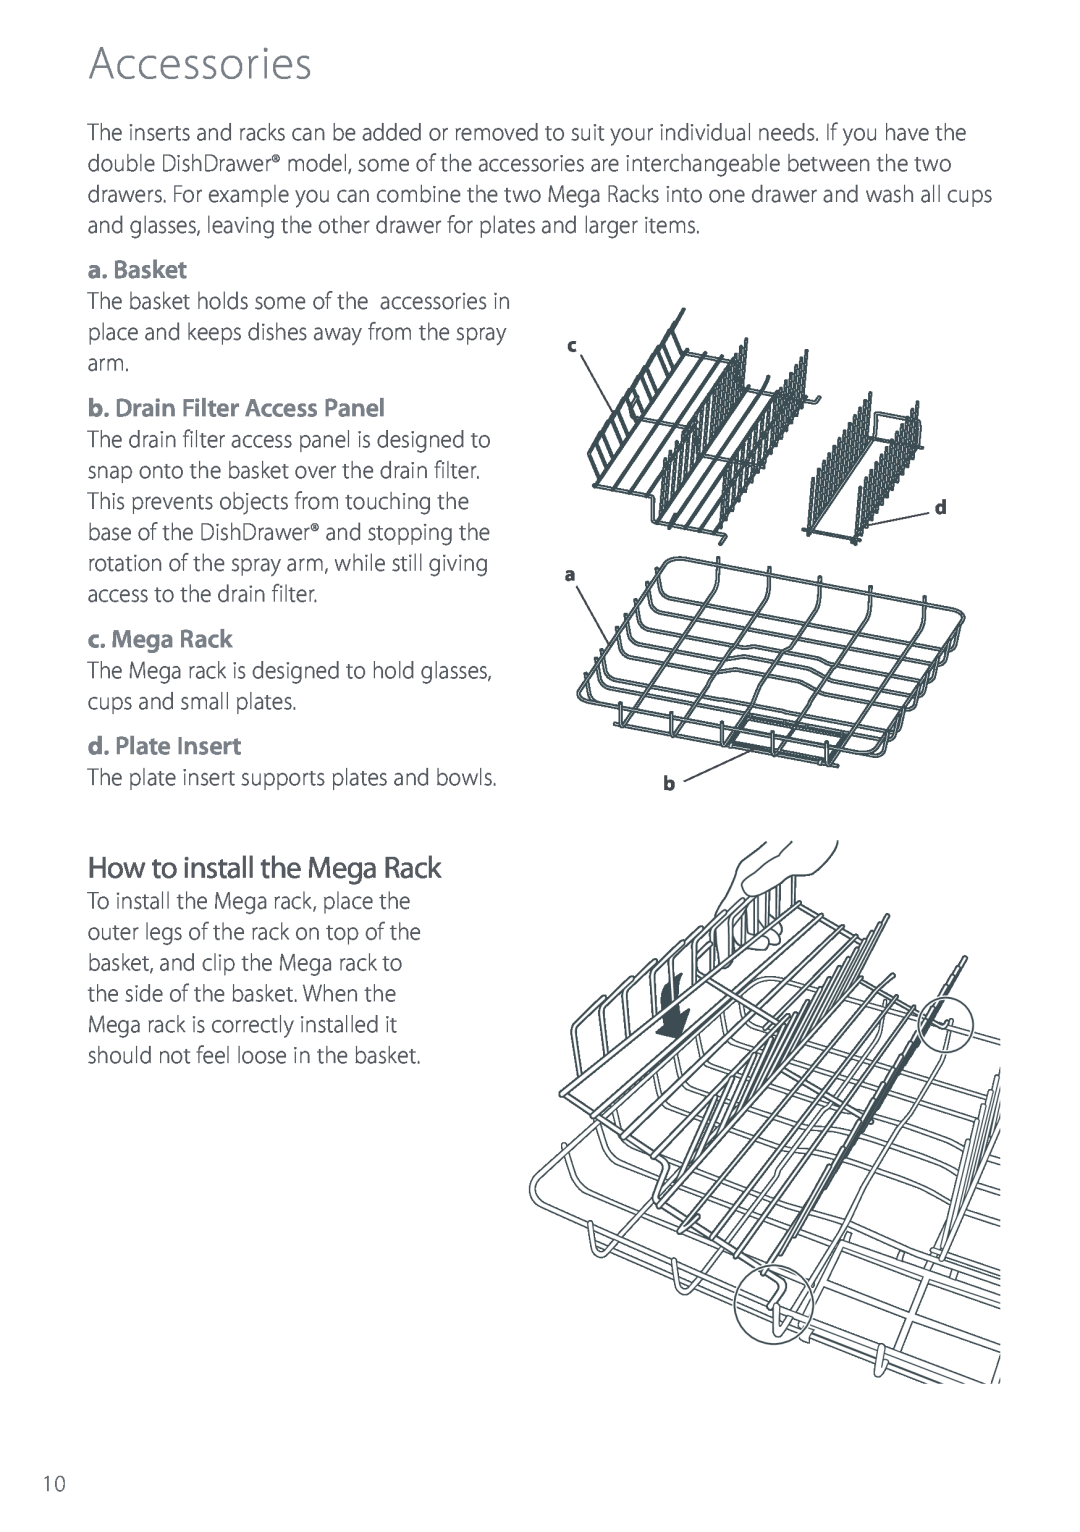 Fisher & Paykel DS603 manual Accessories, How to install the Mega Rack, c d a b 